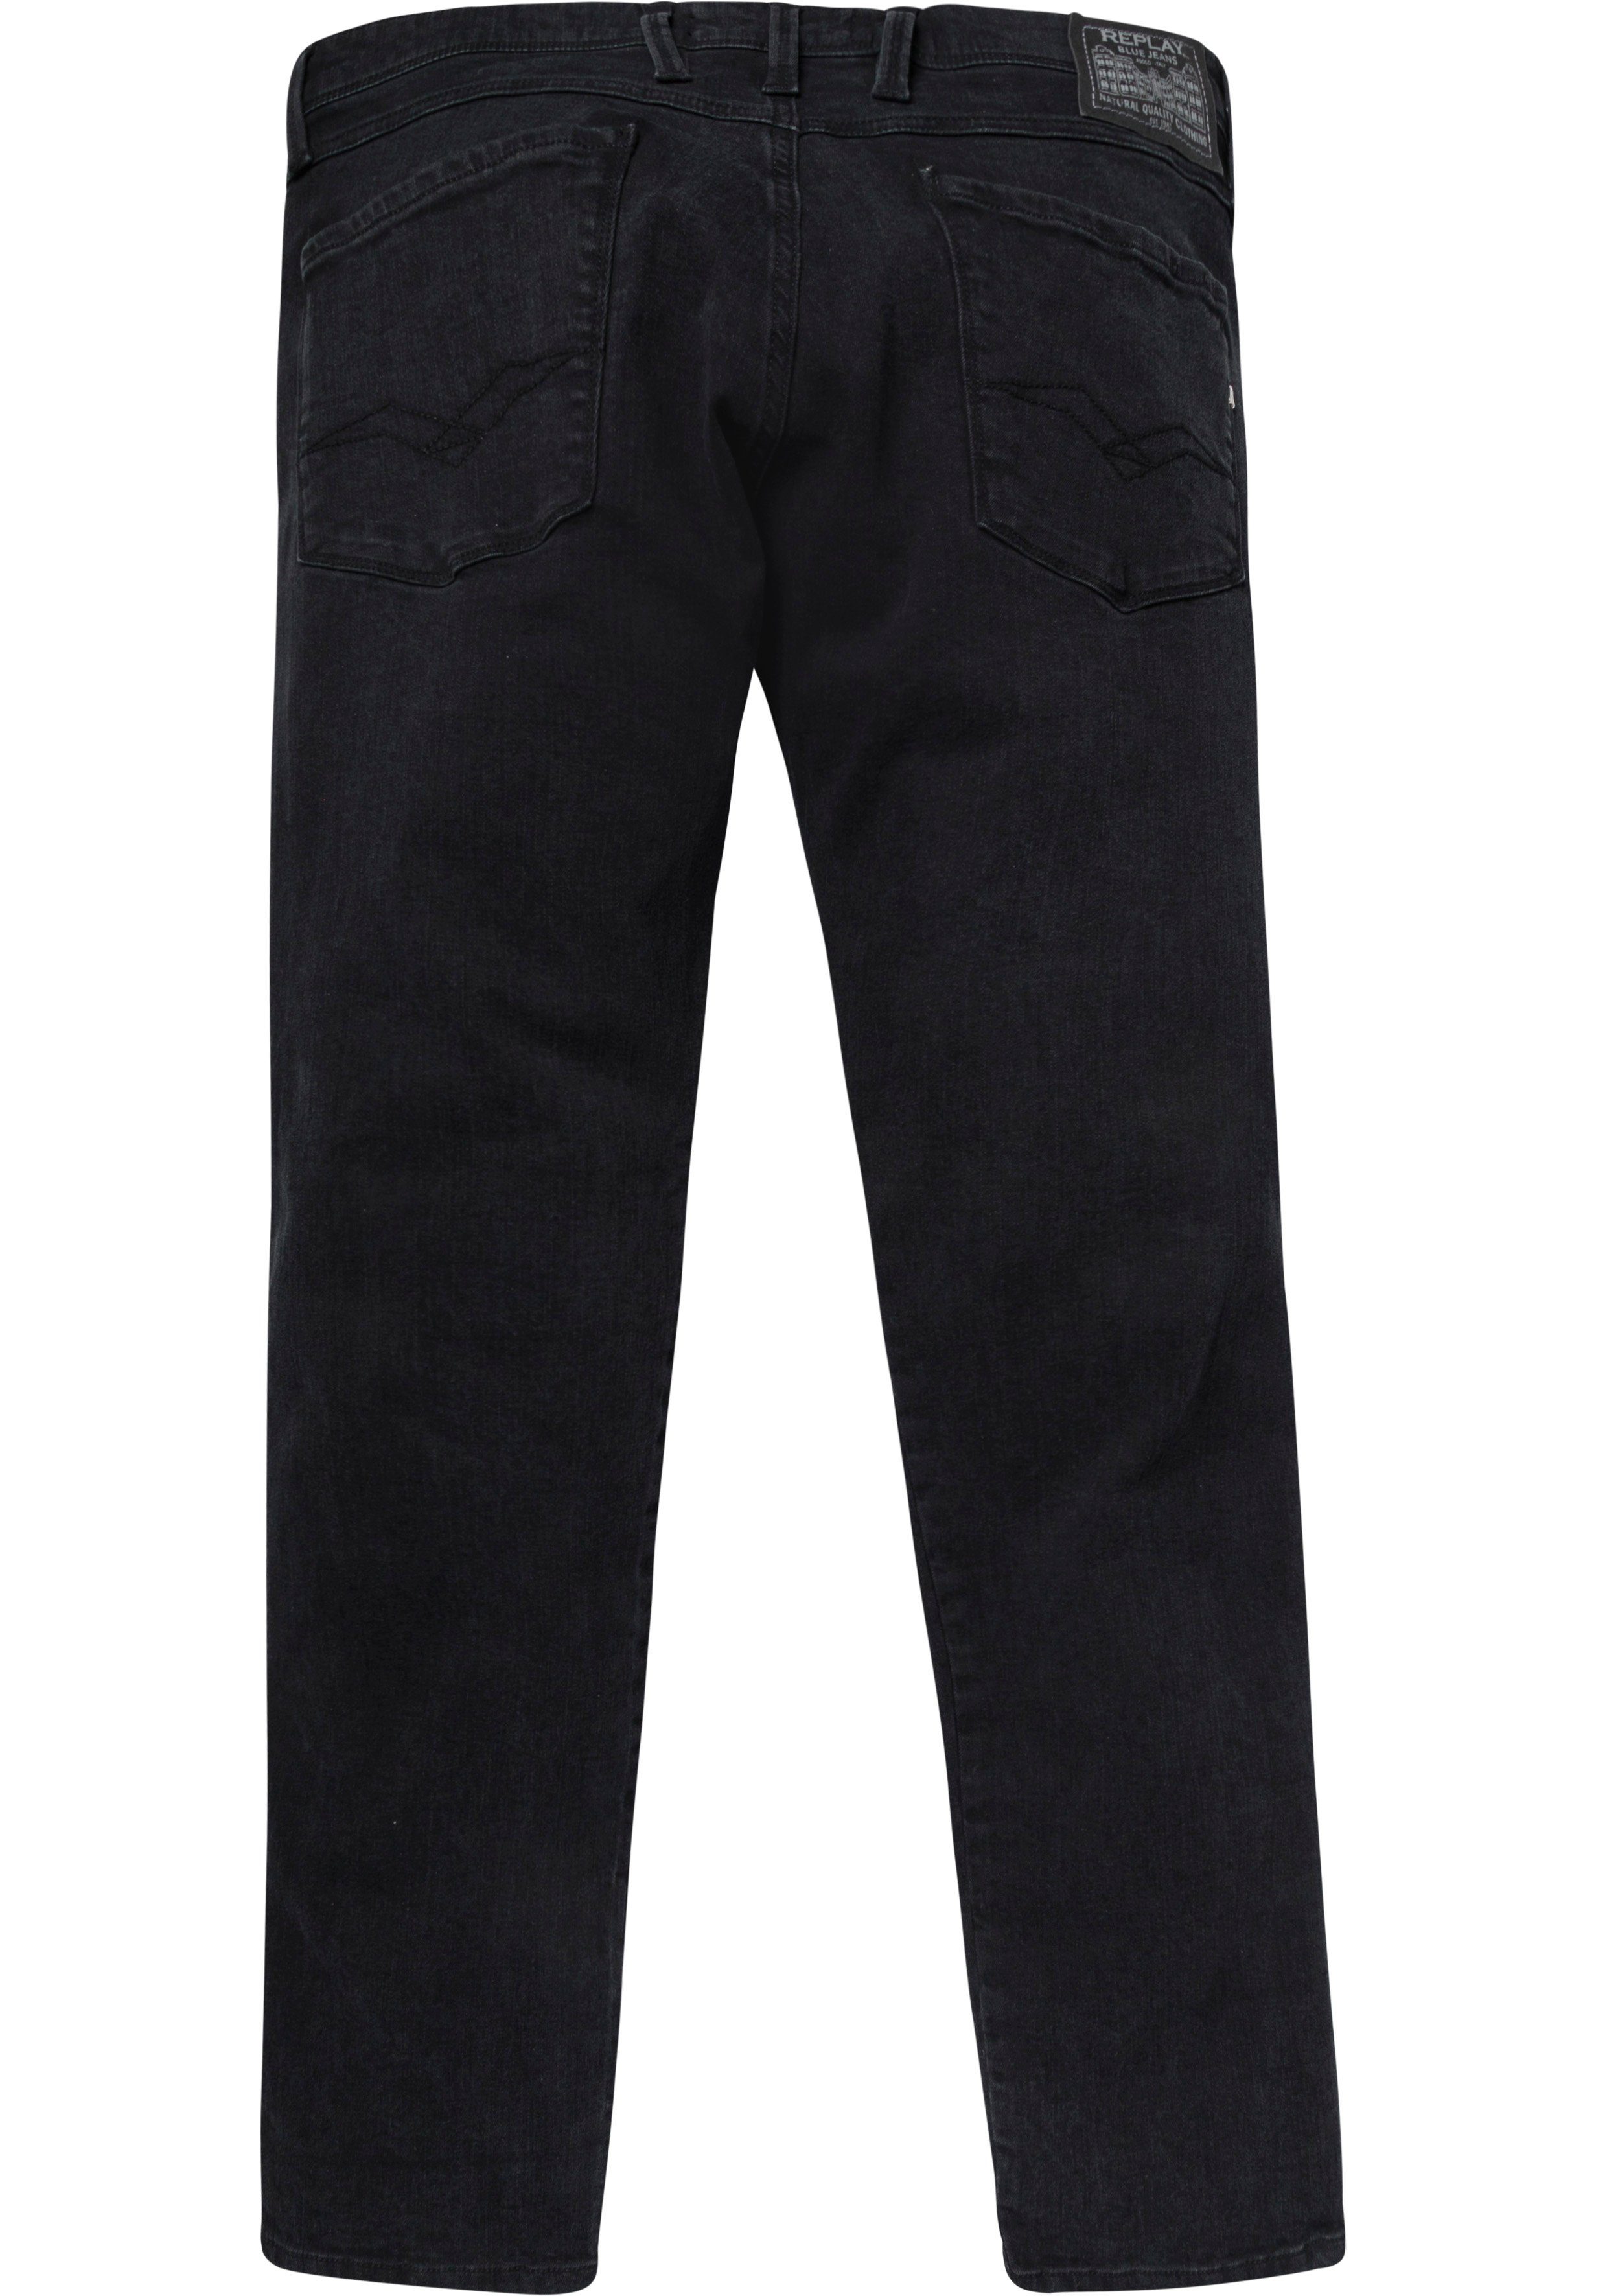 Slim-fit-Jeans Replay ANBASS black-wash